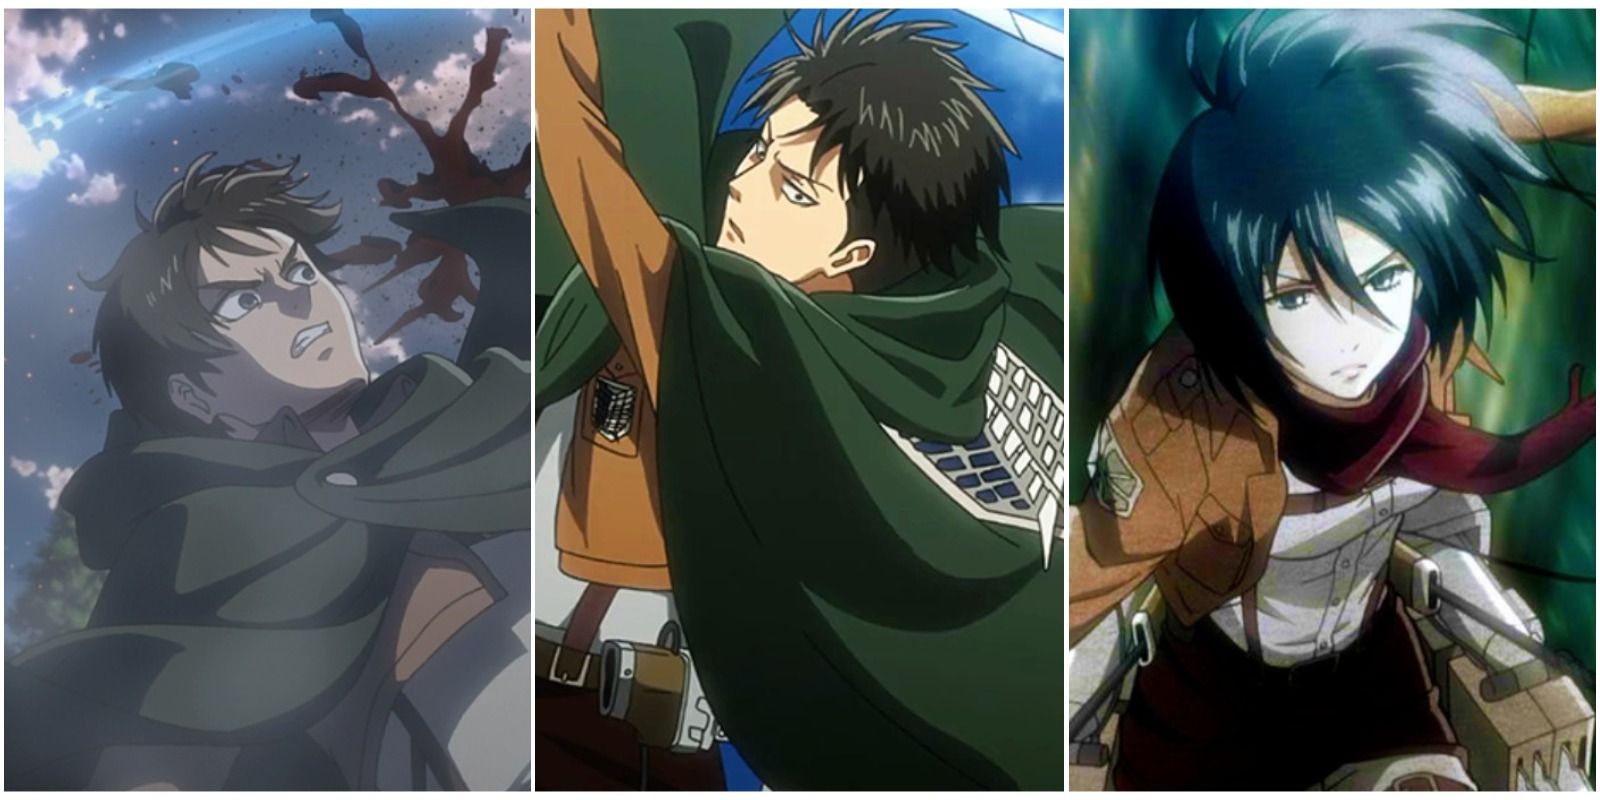 eren, levi, and mikasa in the anime.